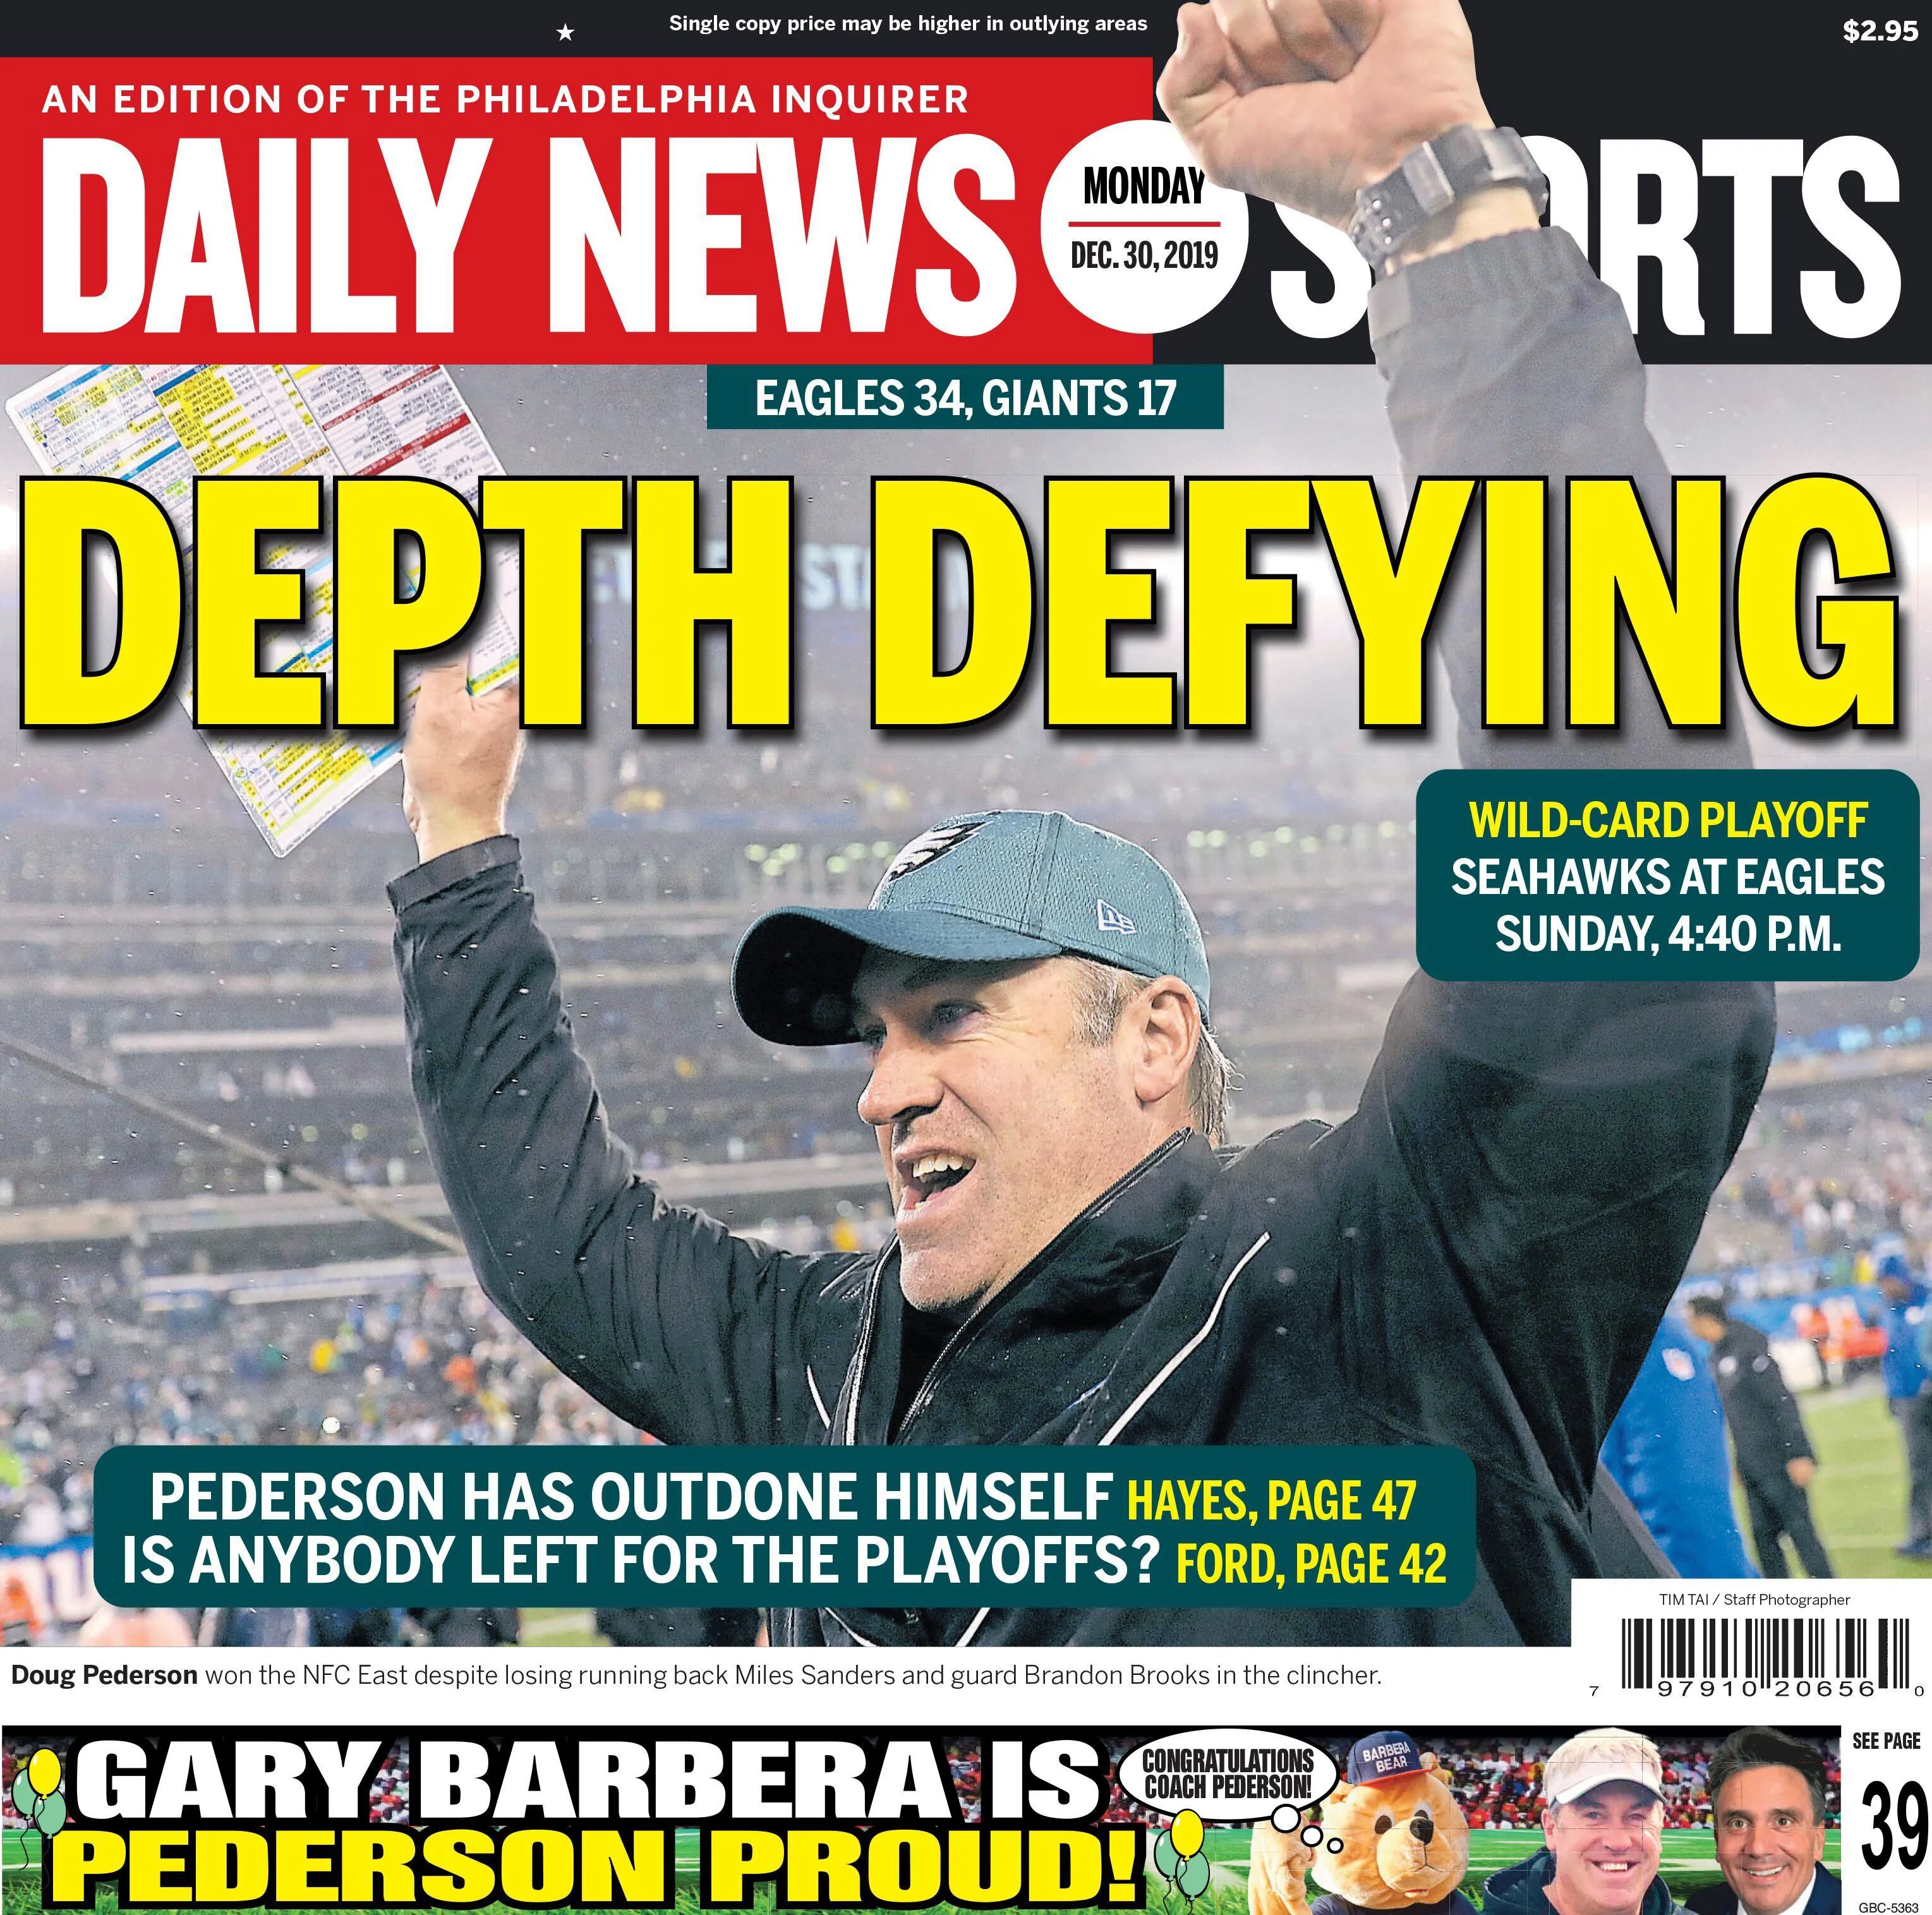 NFL playoffs: Philadelphia Eagles lose to Seattle Seahawks - Inquirer,  Daily News newspaper front pages